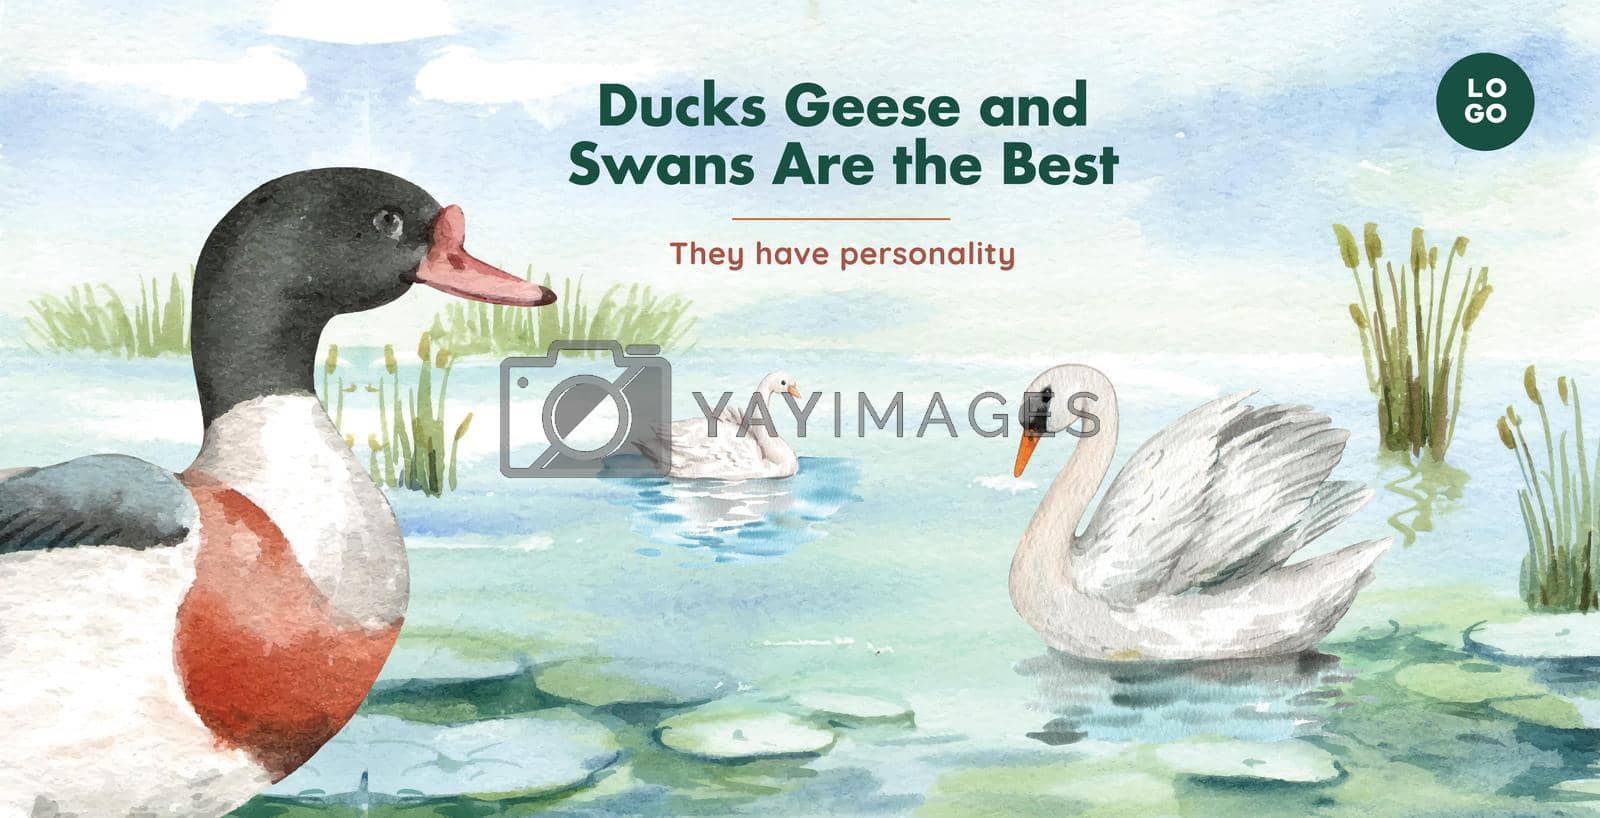 Royalty free image of Billboard template with duck and swan concept,watercolor style by Photographeeasia